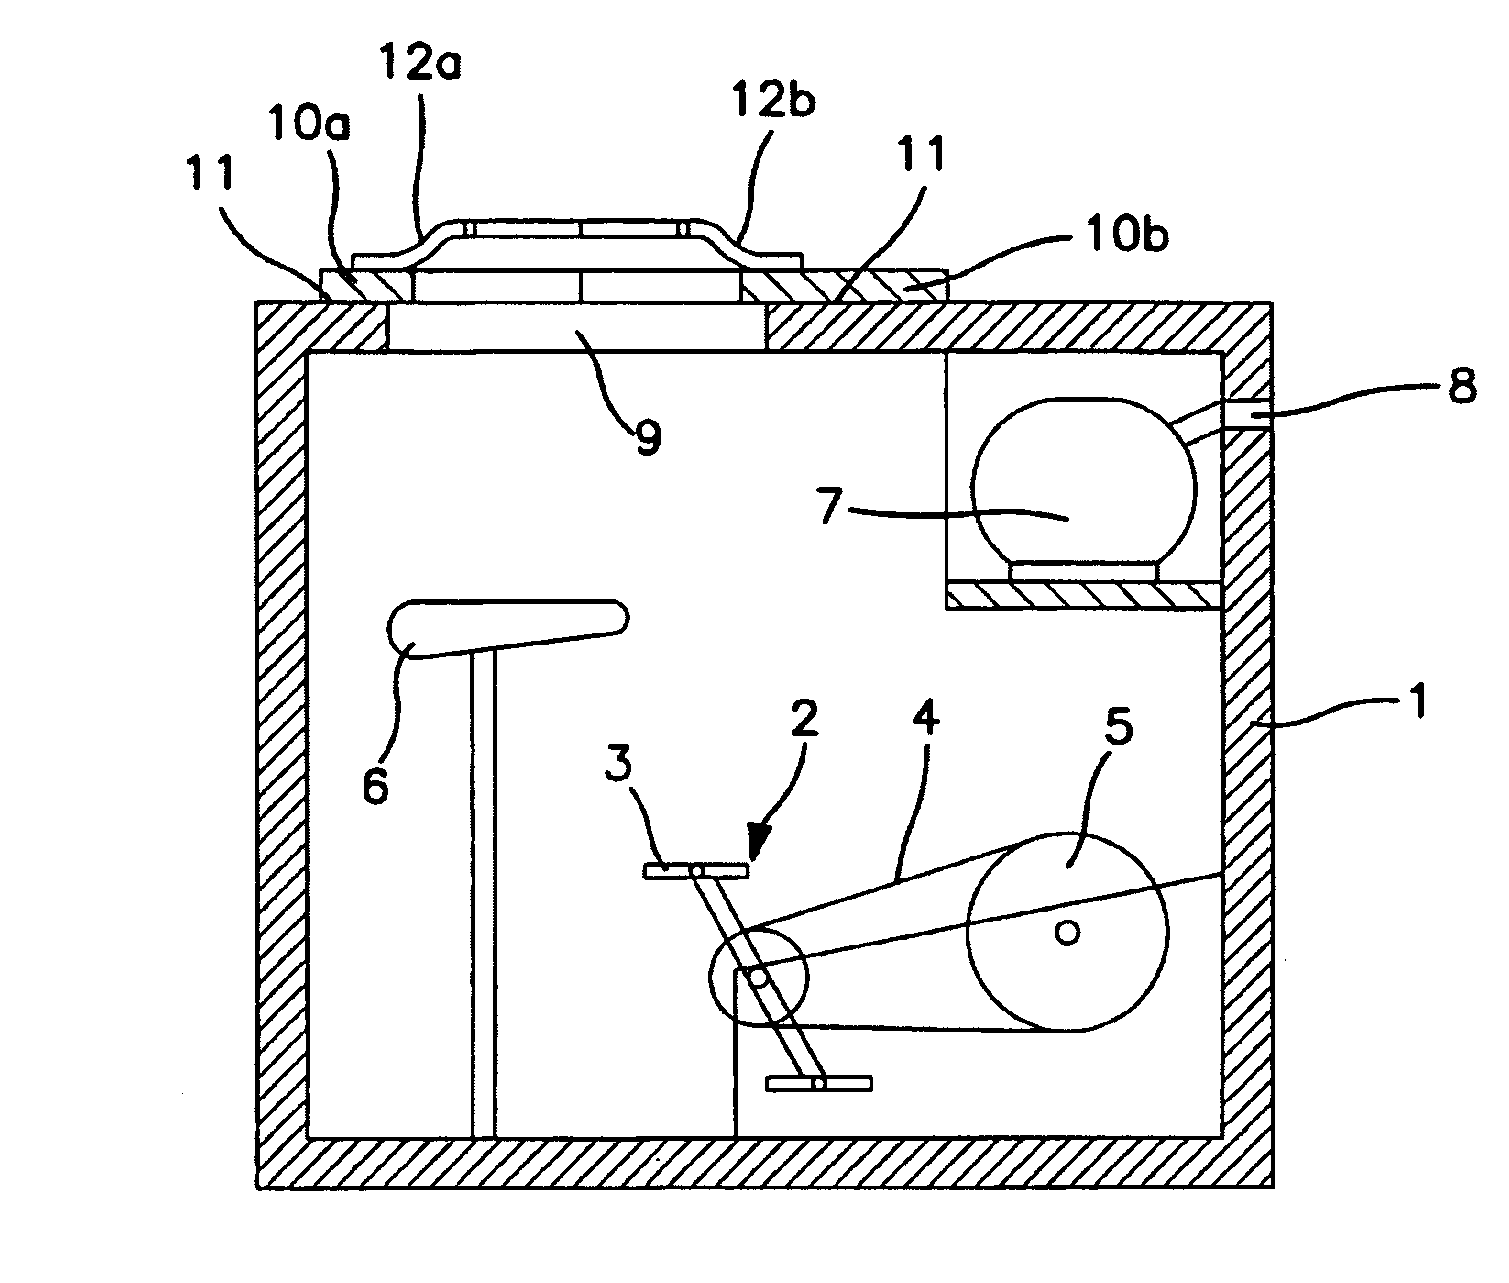 Apparatus for physical training of persons